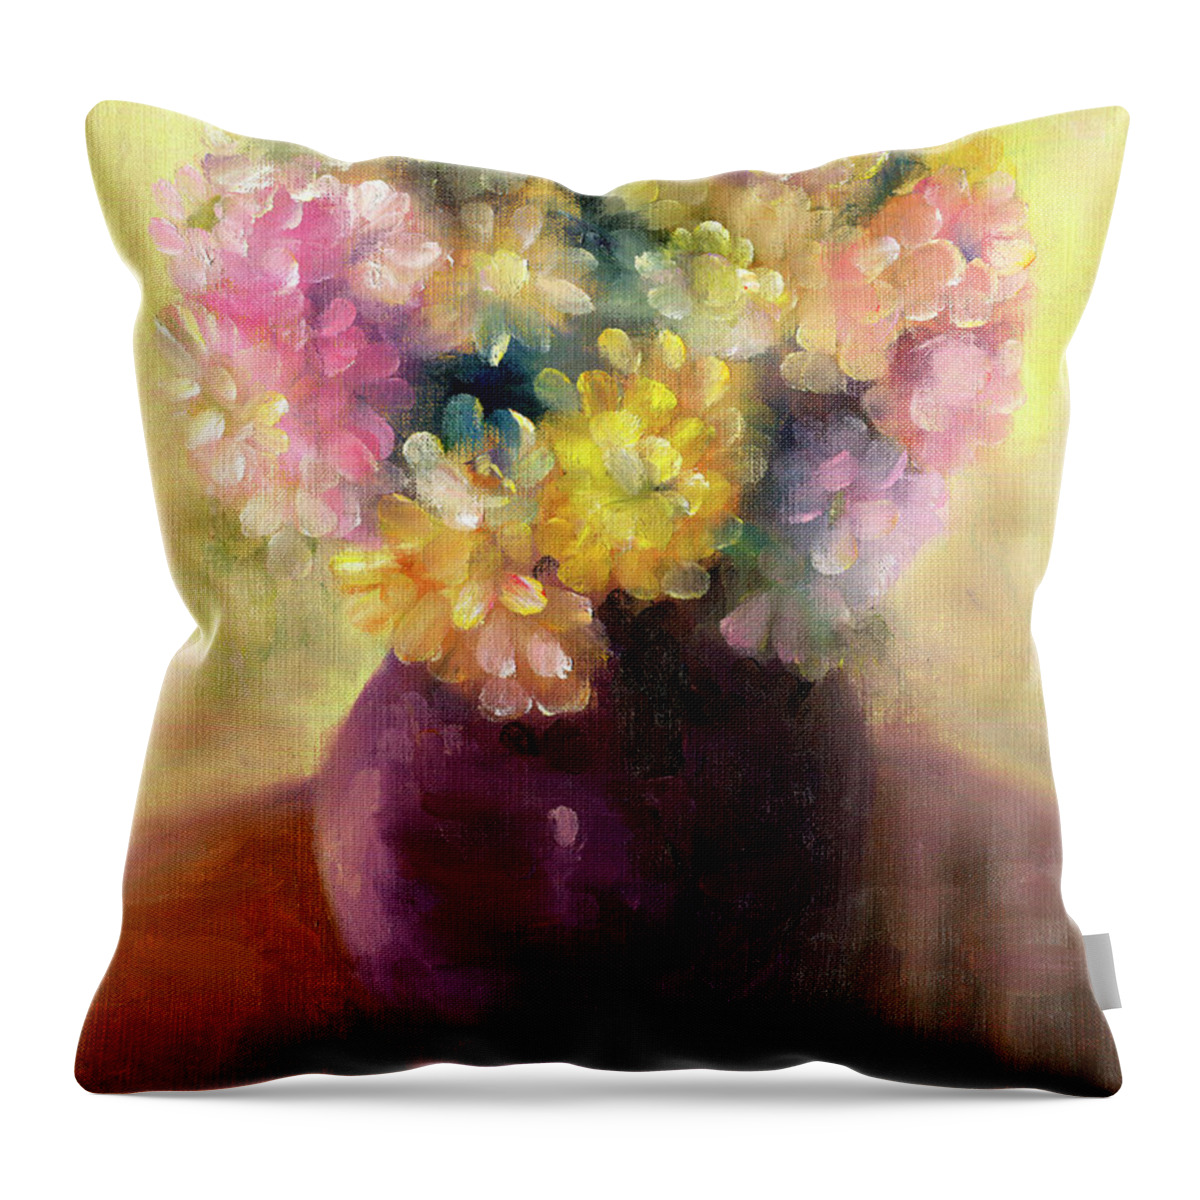 Floral Throw Pillow featuring the painting Floral Oil Sketch by Marlene Book